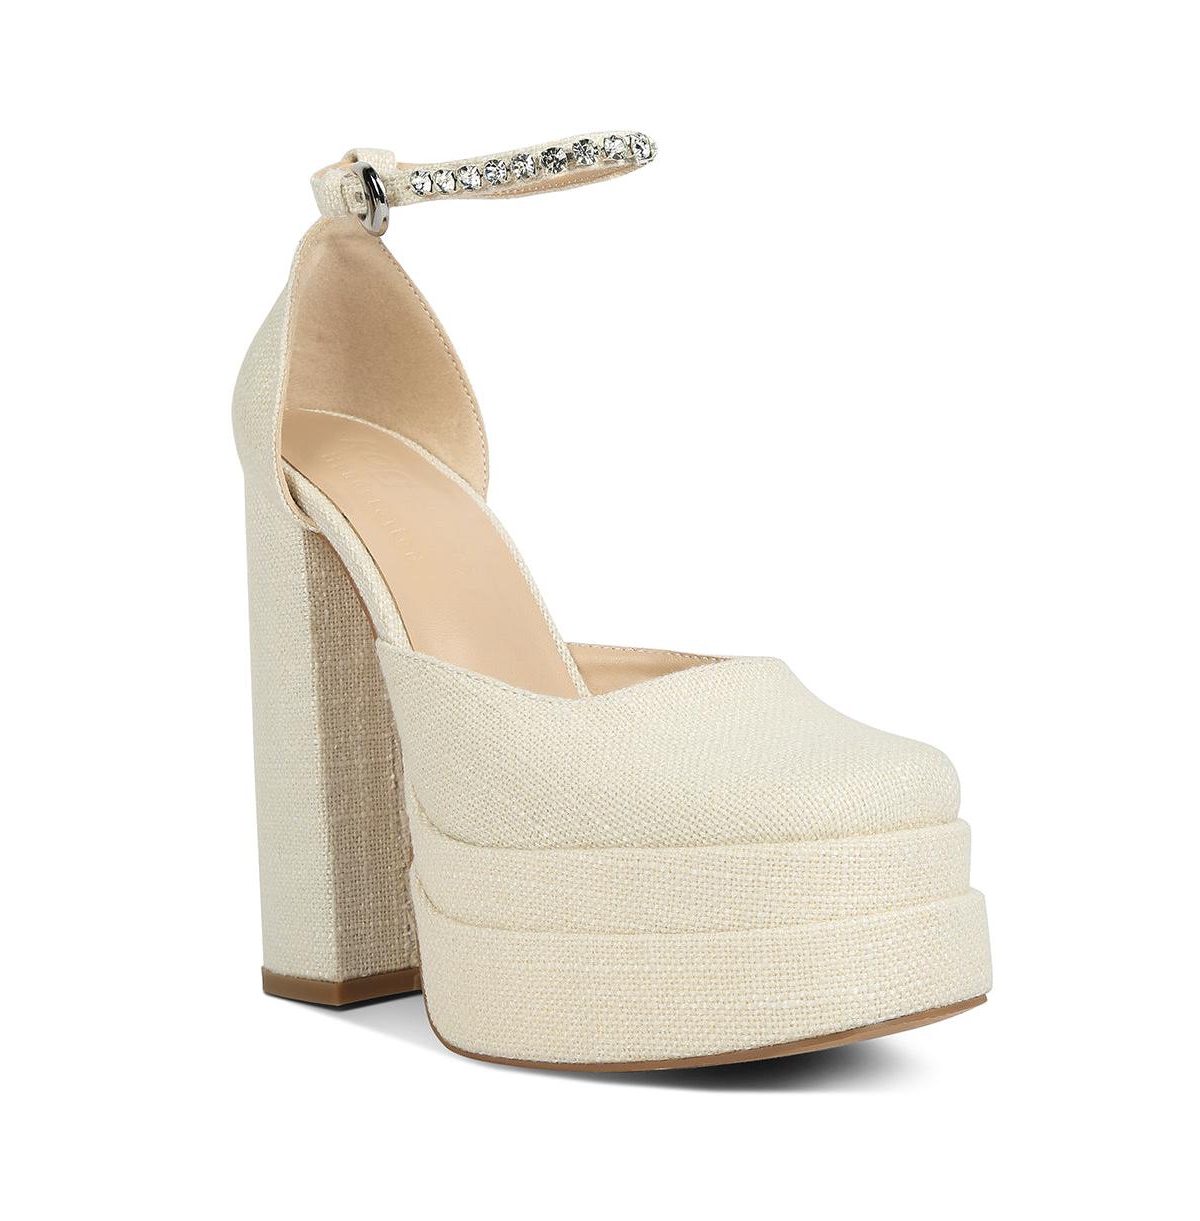 Cosette Diamante Embellished Ankle Strap High Block Heel Sandals in Off White - Off white